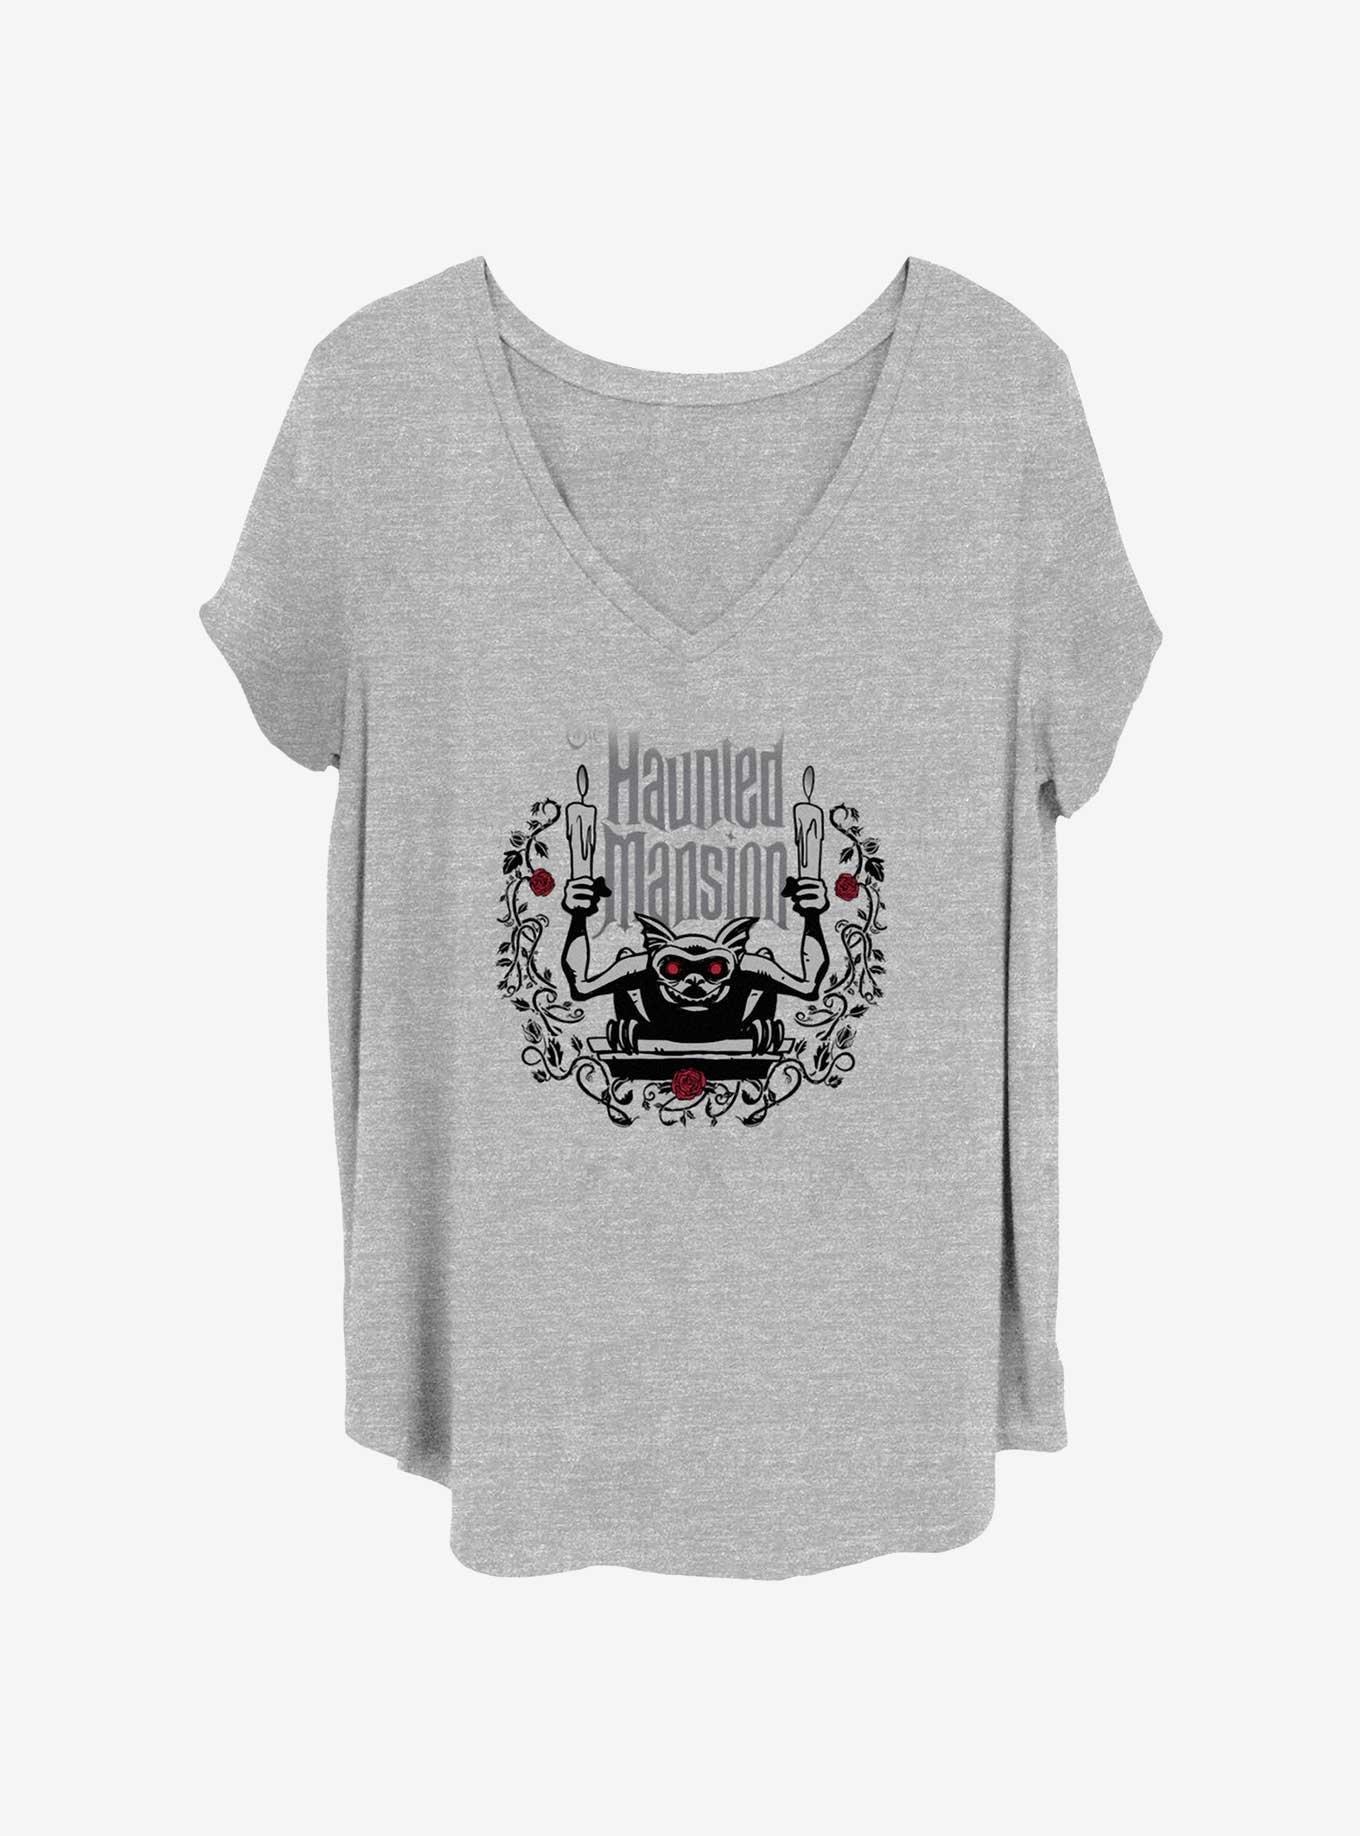 Disney The Haunted Mansion Gargoyle With Candles Girls T-Shirt Plus Size, HEATHER GR, hi-res